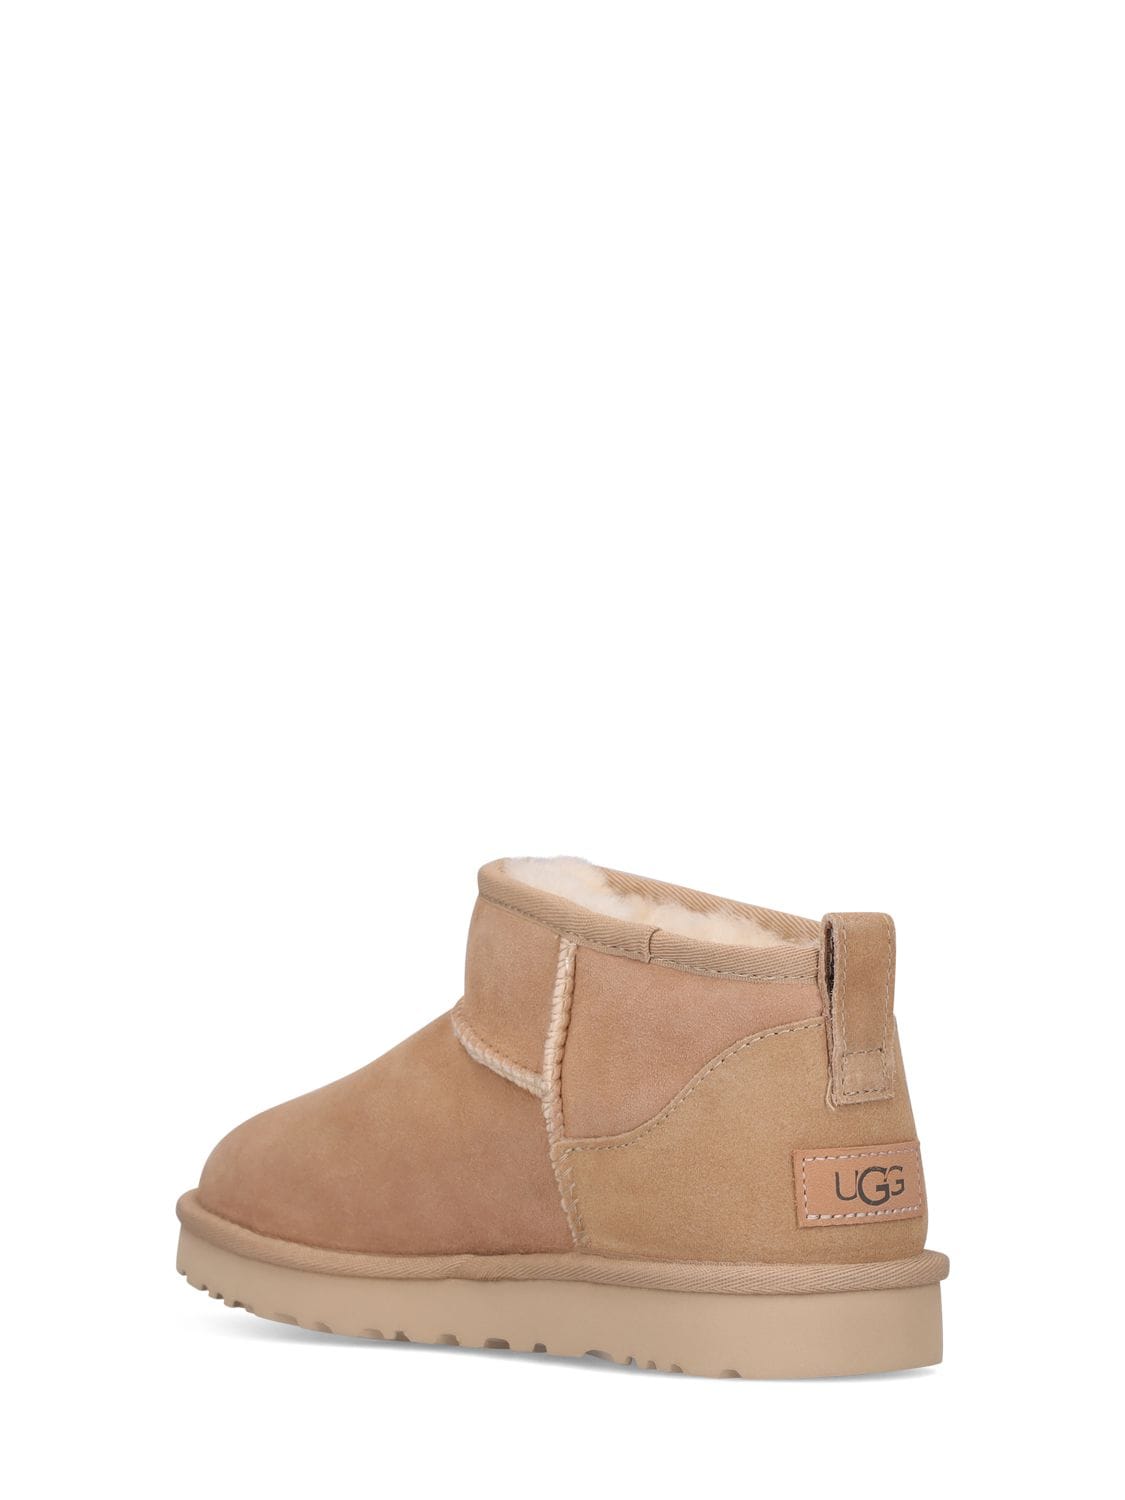 Shop Ugg 10mm Classic Ultra Mini Shearling Boots In Sand